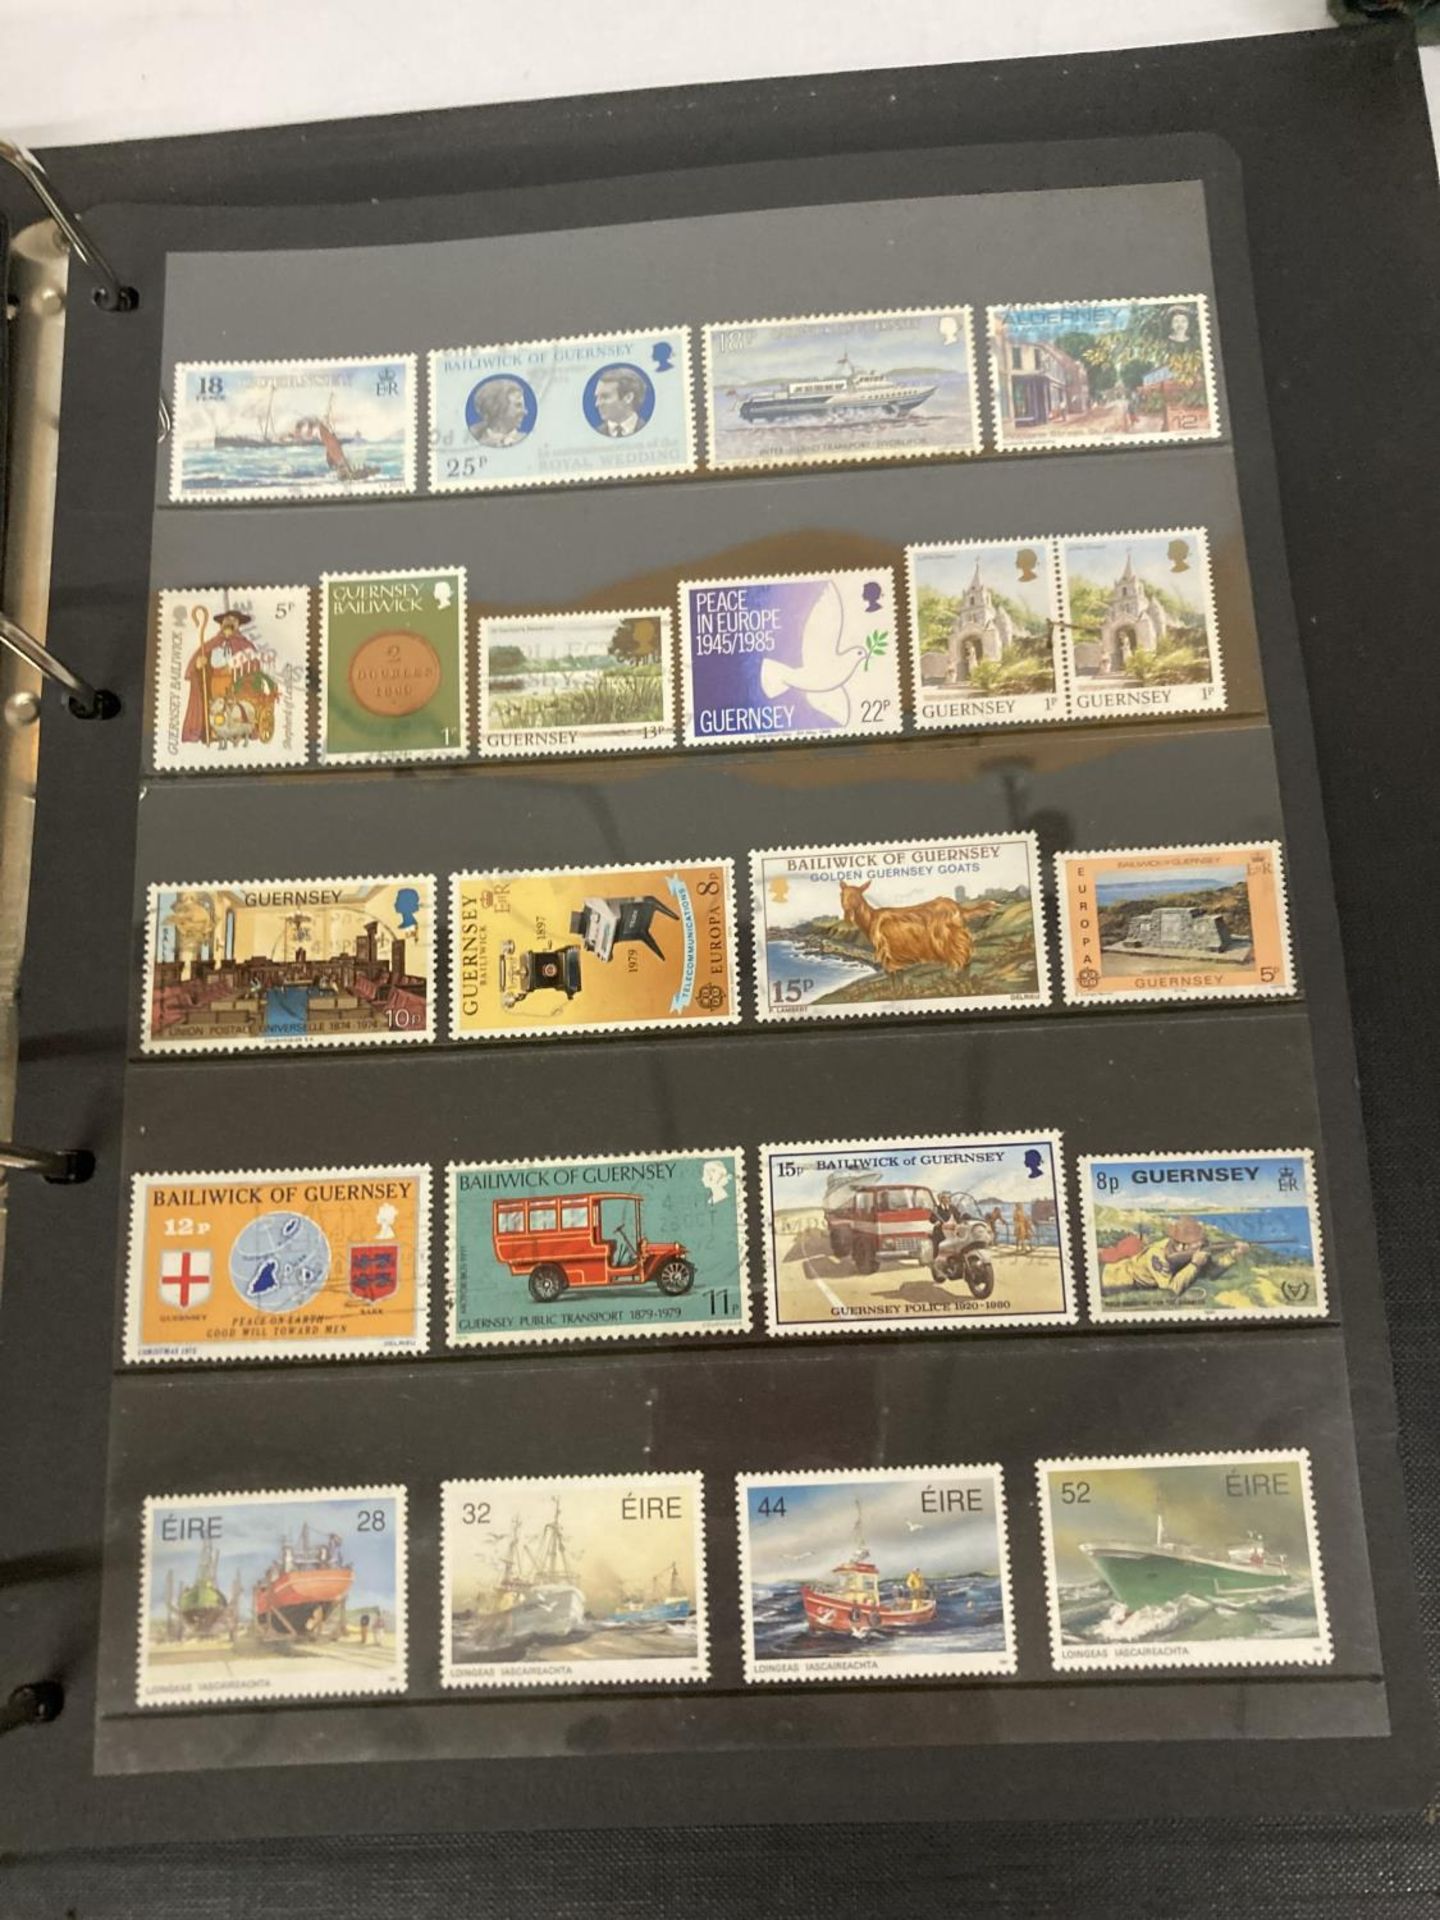 TWO ALBUMS CONTAINING GB AND WORLD STAMPS - Image 6 of 6